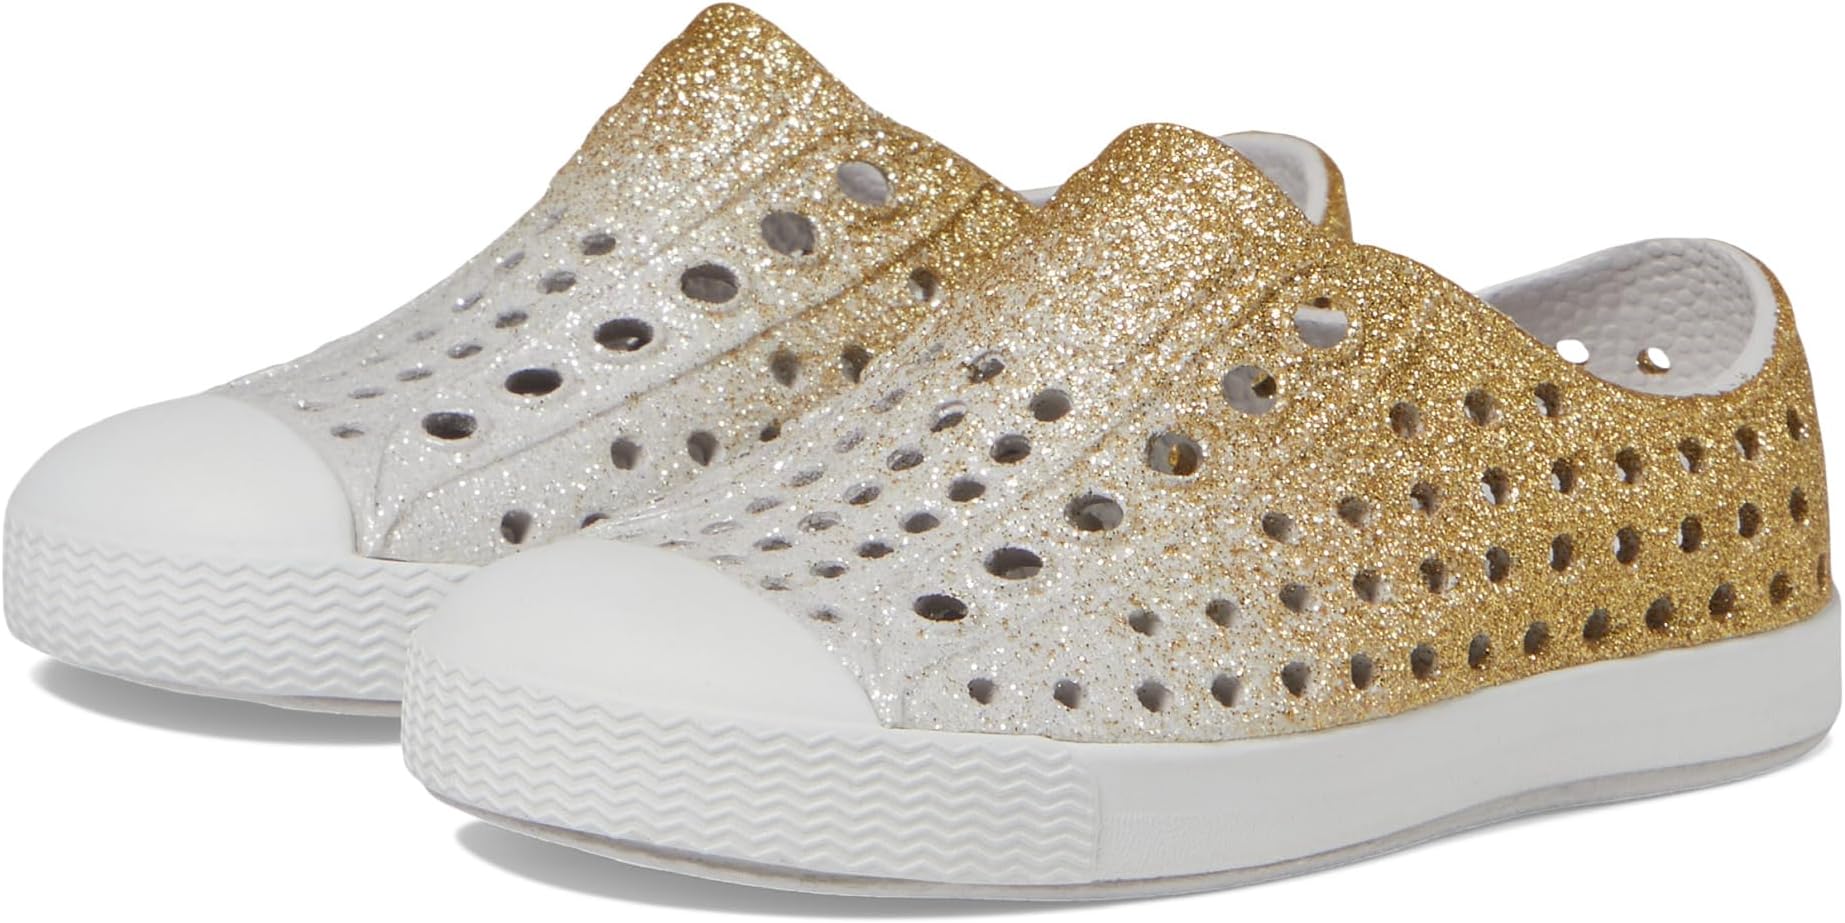 2021 girls ballet flats baby dance party girls shoes glitter children shoes gold bling princess shoes 3 12 years kids shoes Кроссовки Jefferson Bling Native Shoes Kids, цвет Gold Frost Bling/Shell White